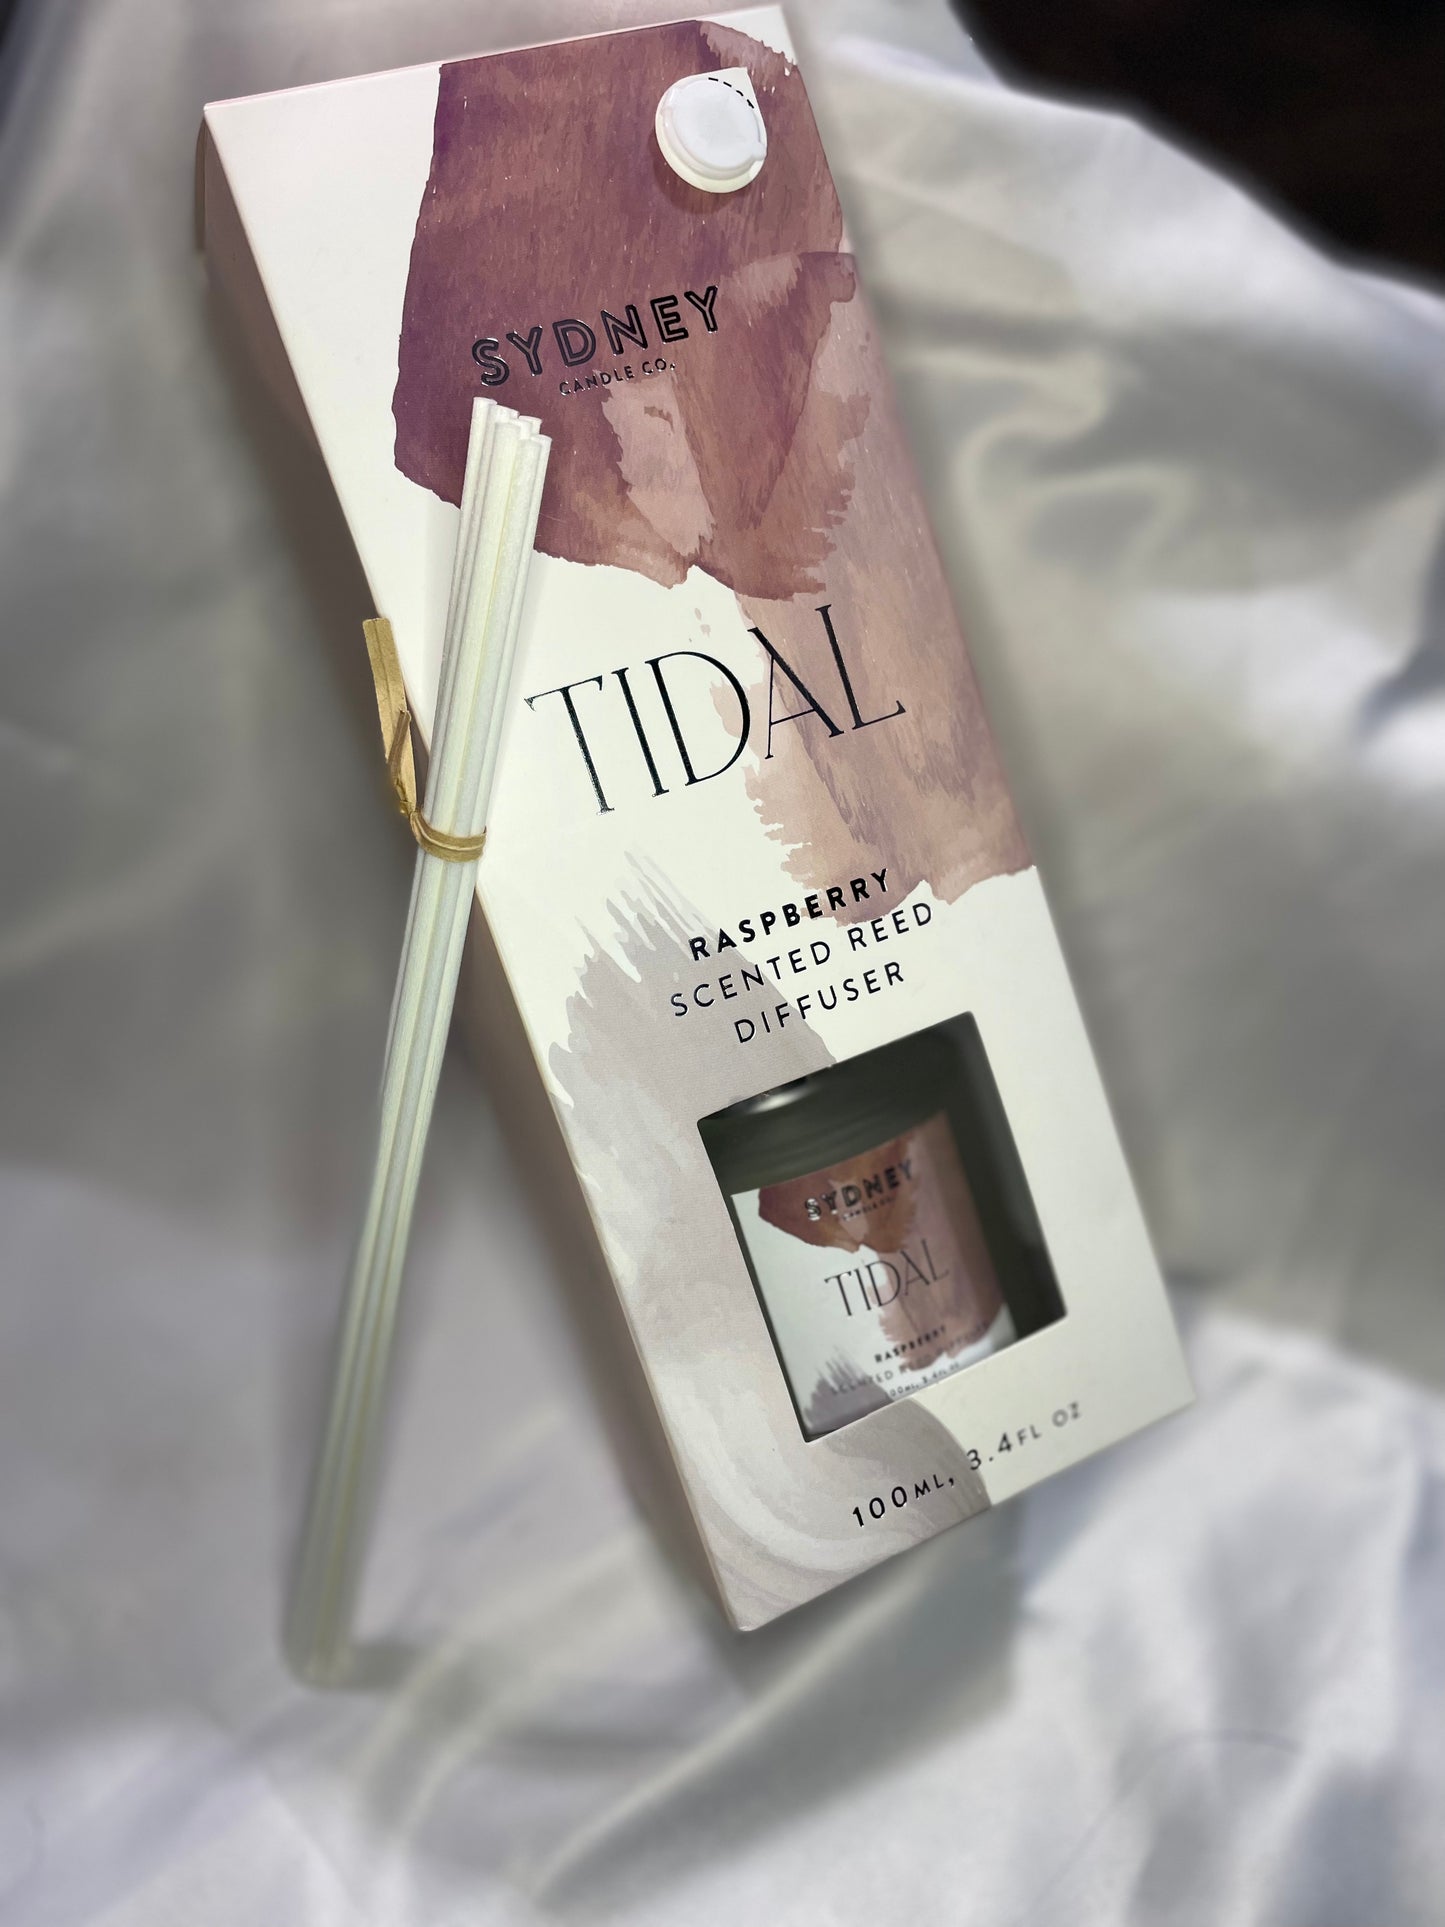 SYDNEY CANDLE CO. Tidal Raspberry Diffuser